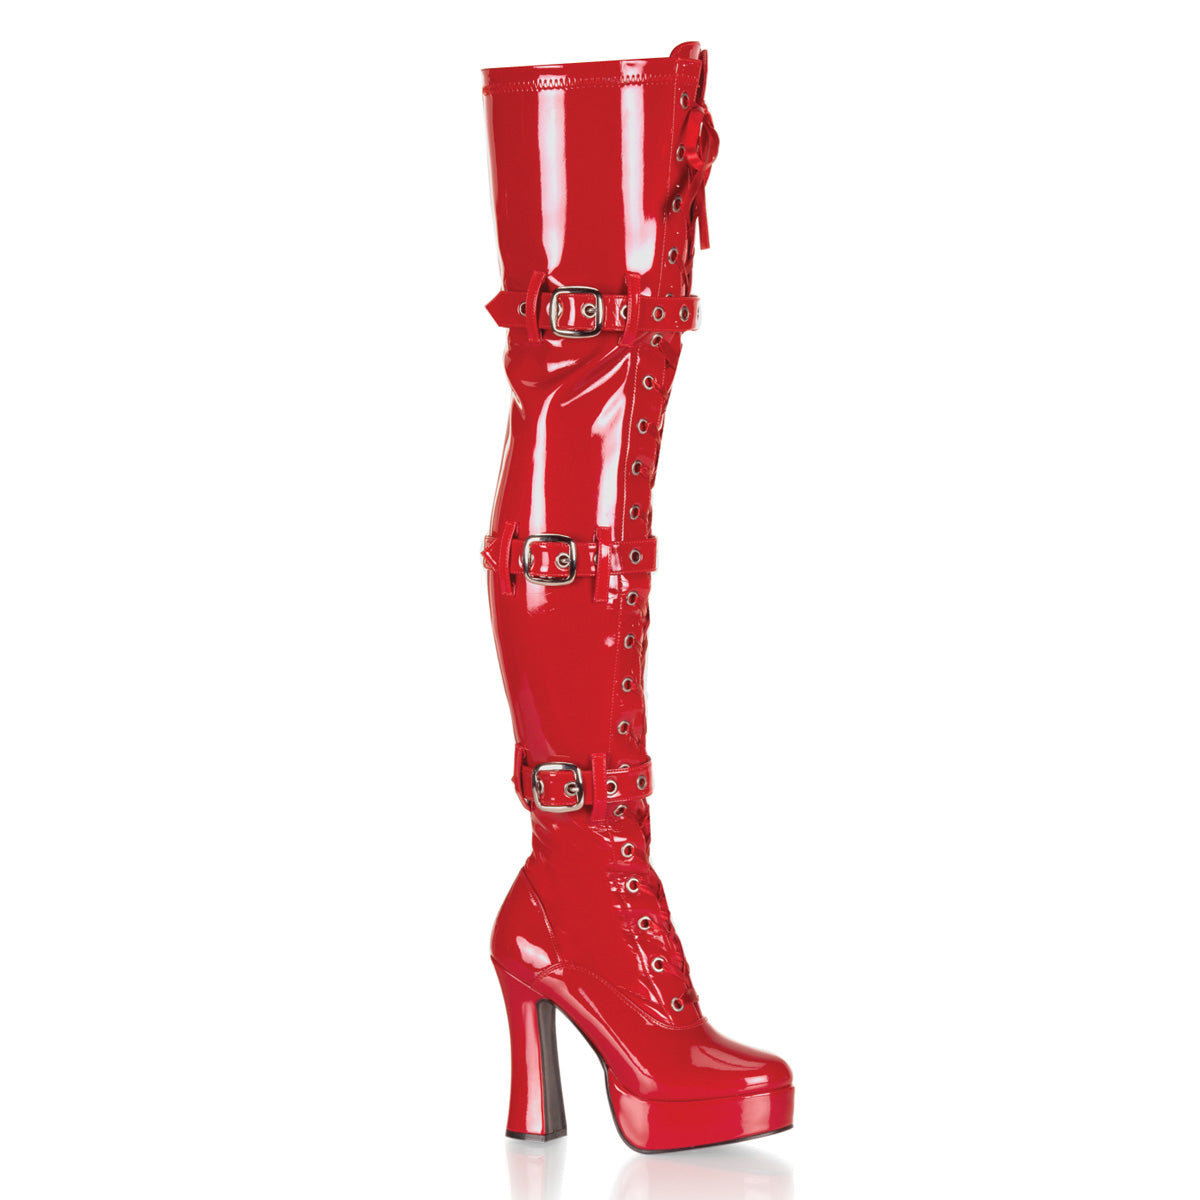 ELECTRA-3028 Pleaser 5 Inch Heel Red Pole Dancing Platforms-Pleaser- Sexy Shoes